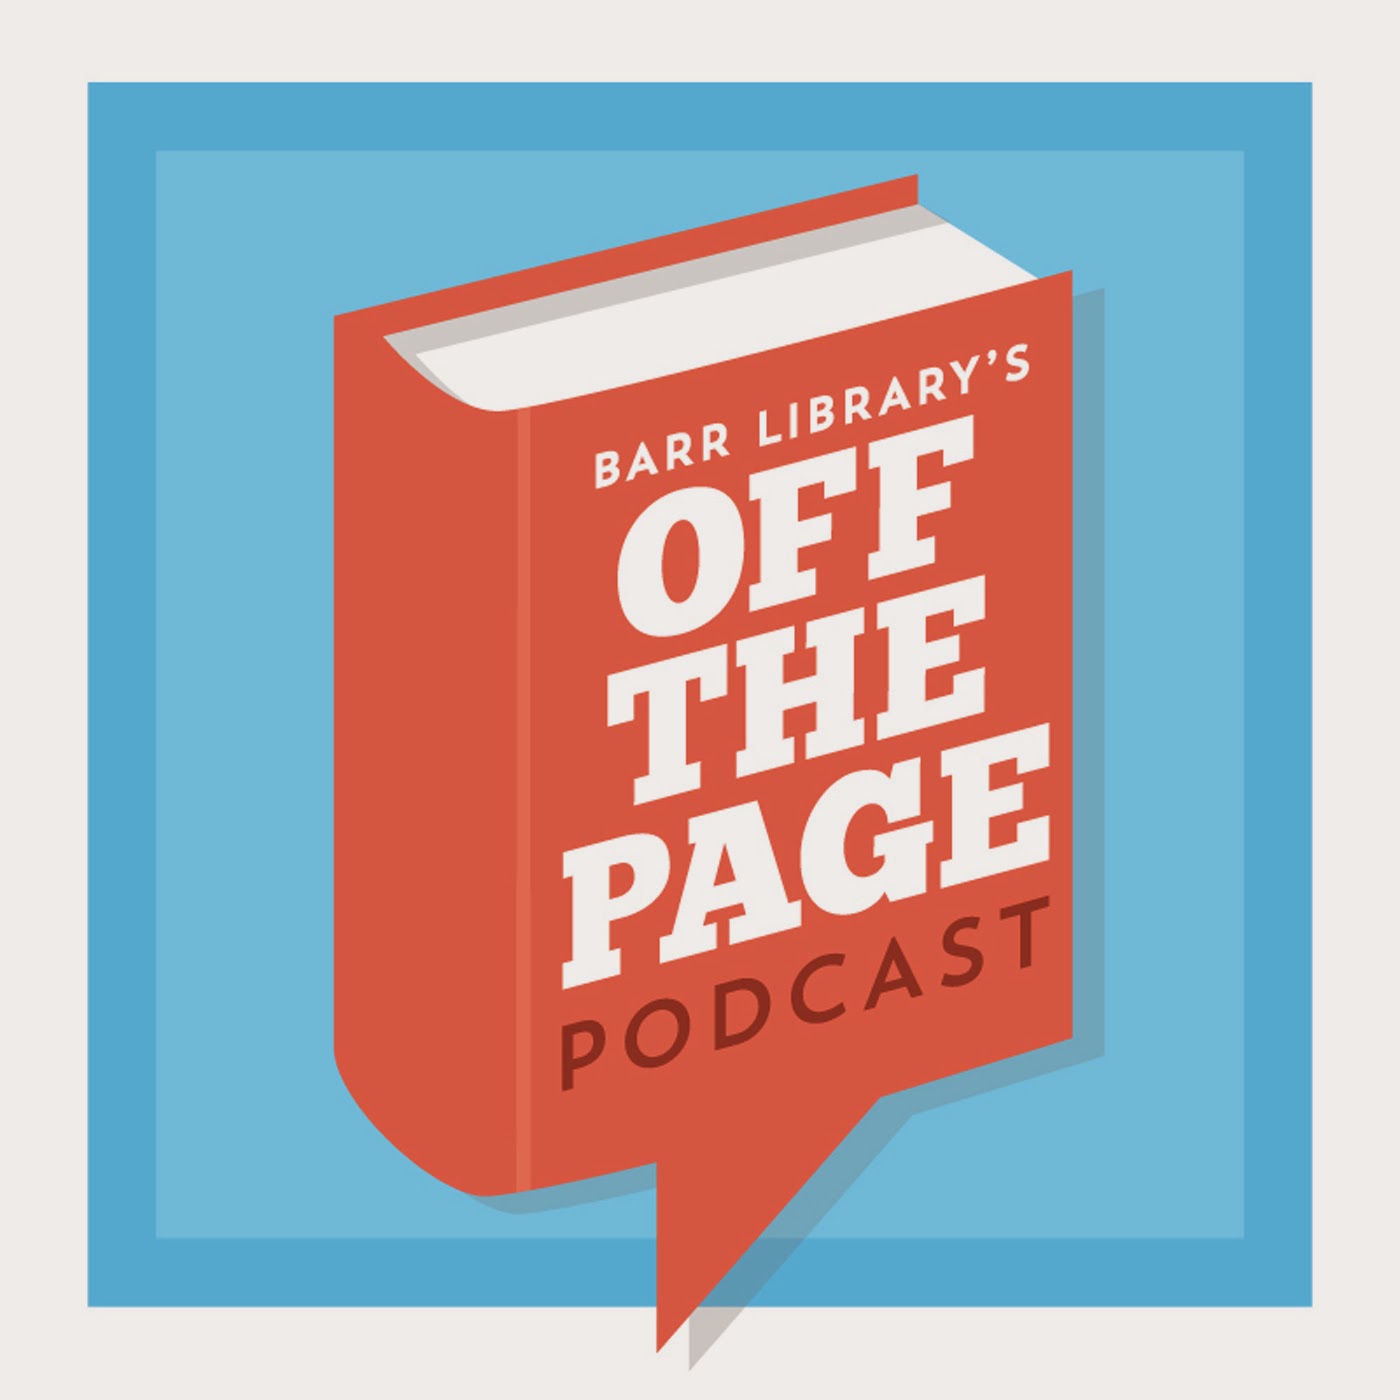 Barr Library's Off the Page Podcast